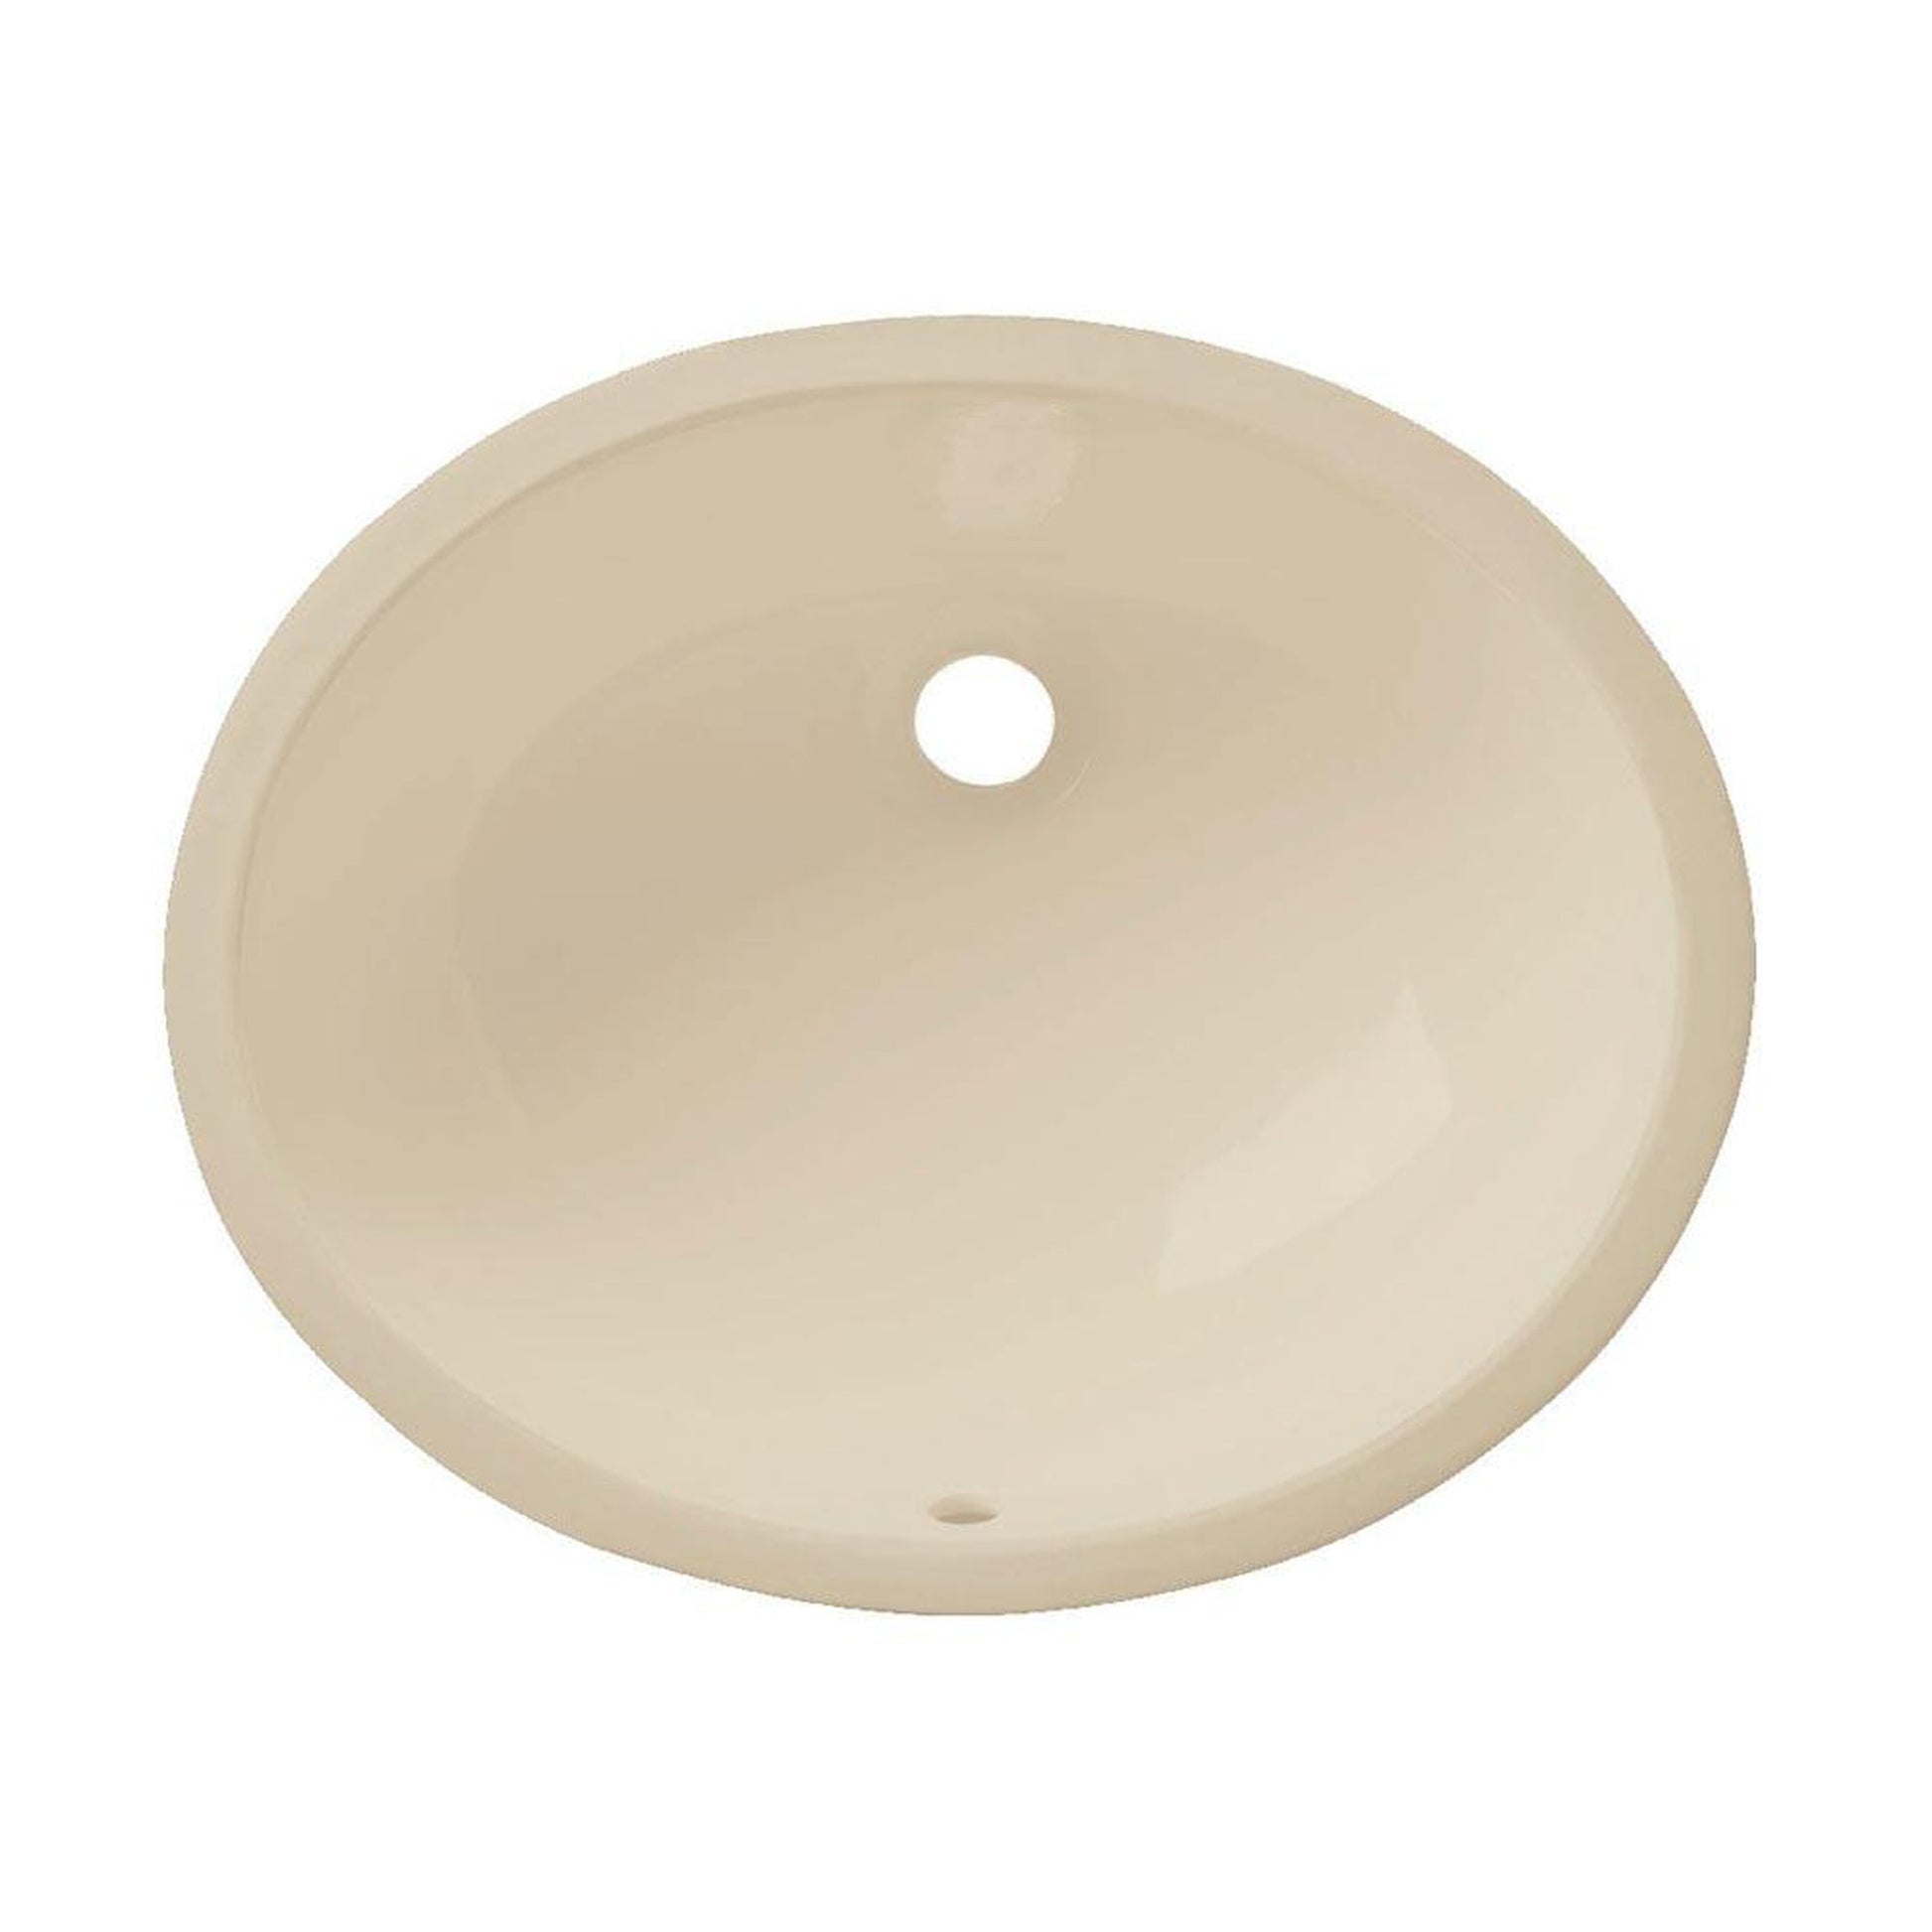 Allora USA 15.125" X 12.25" Vitreous China Biscuit Oval Porcelain Undermount Sink With Overflow